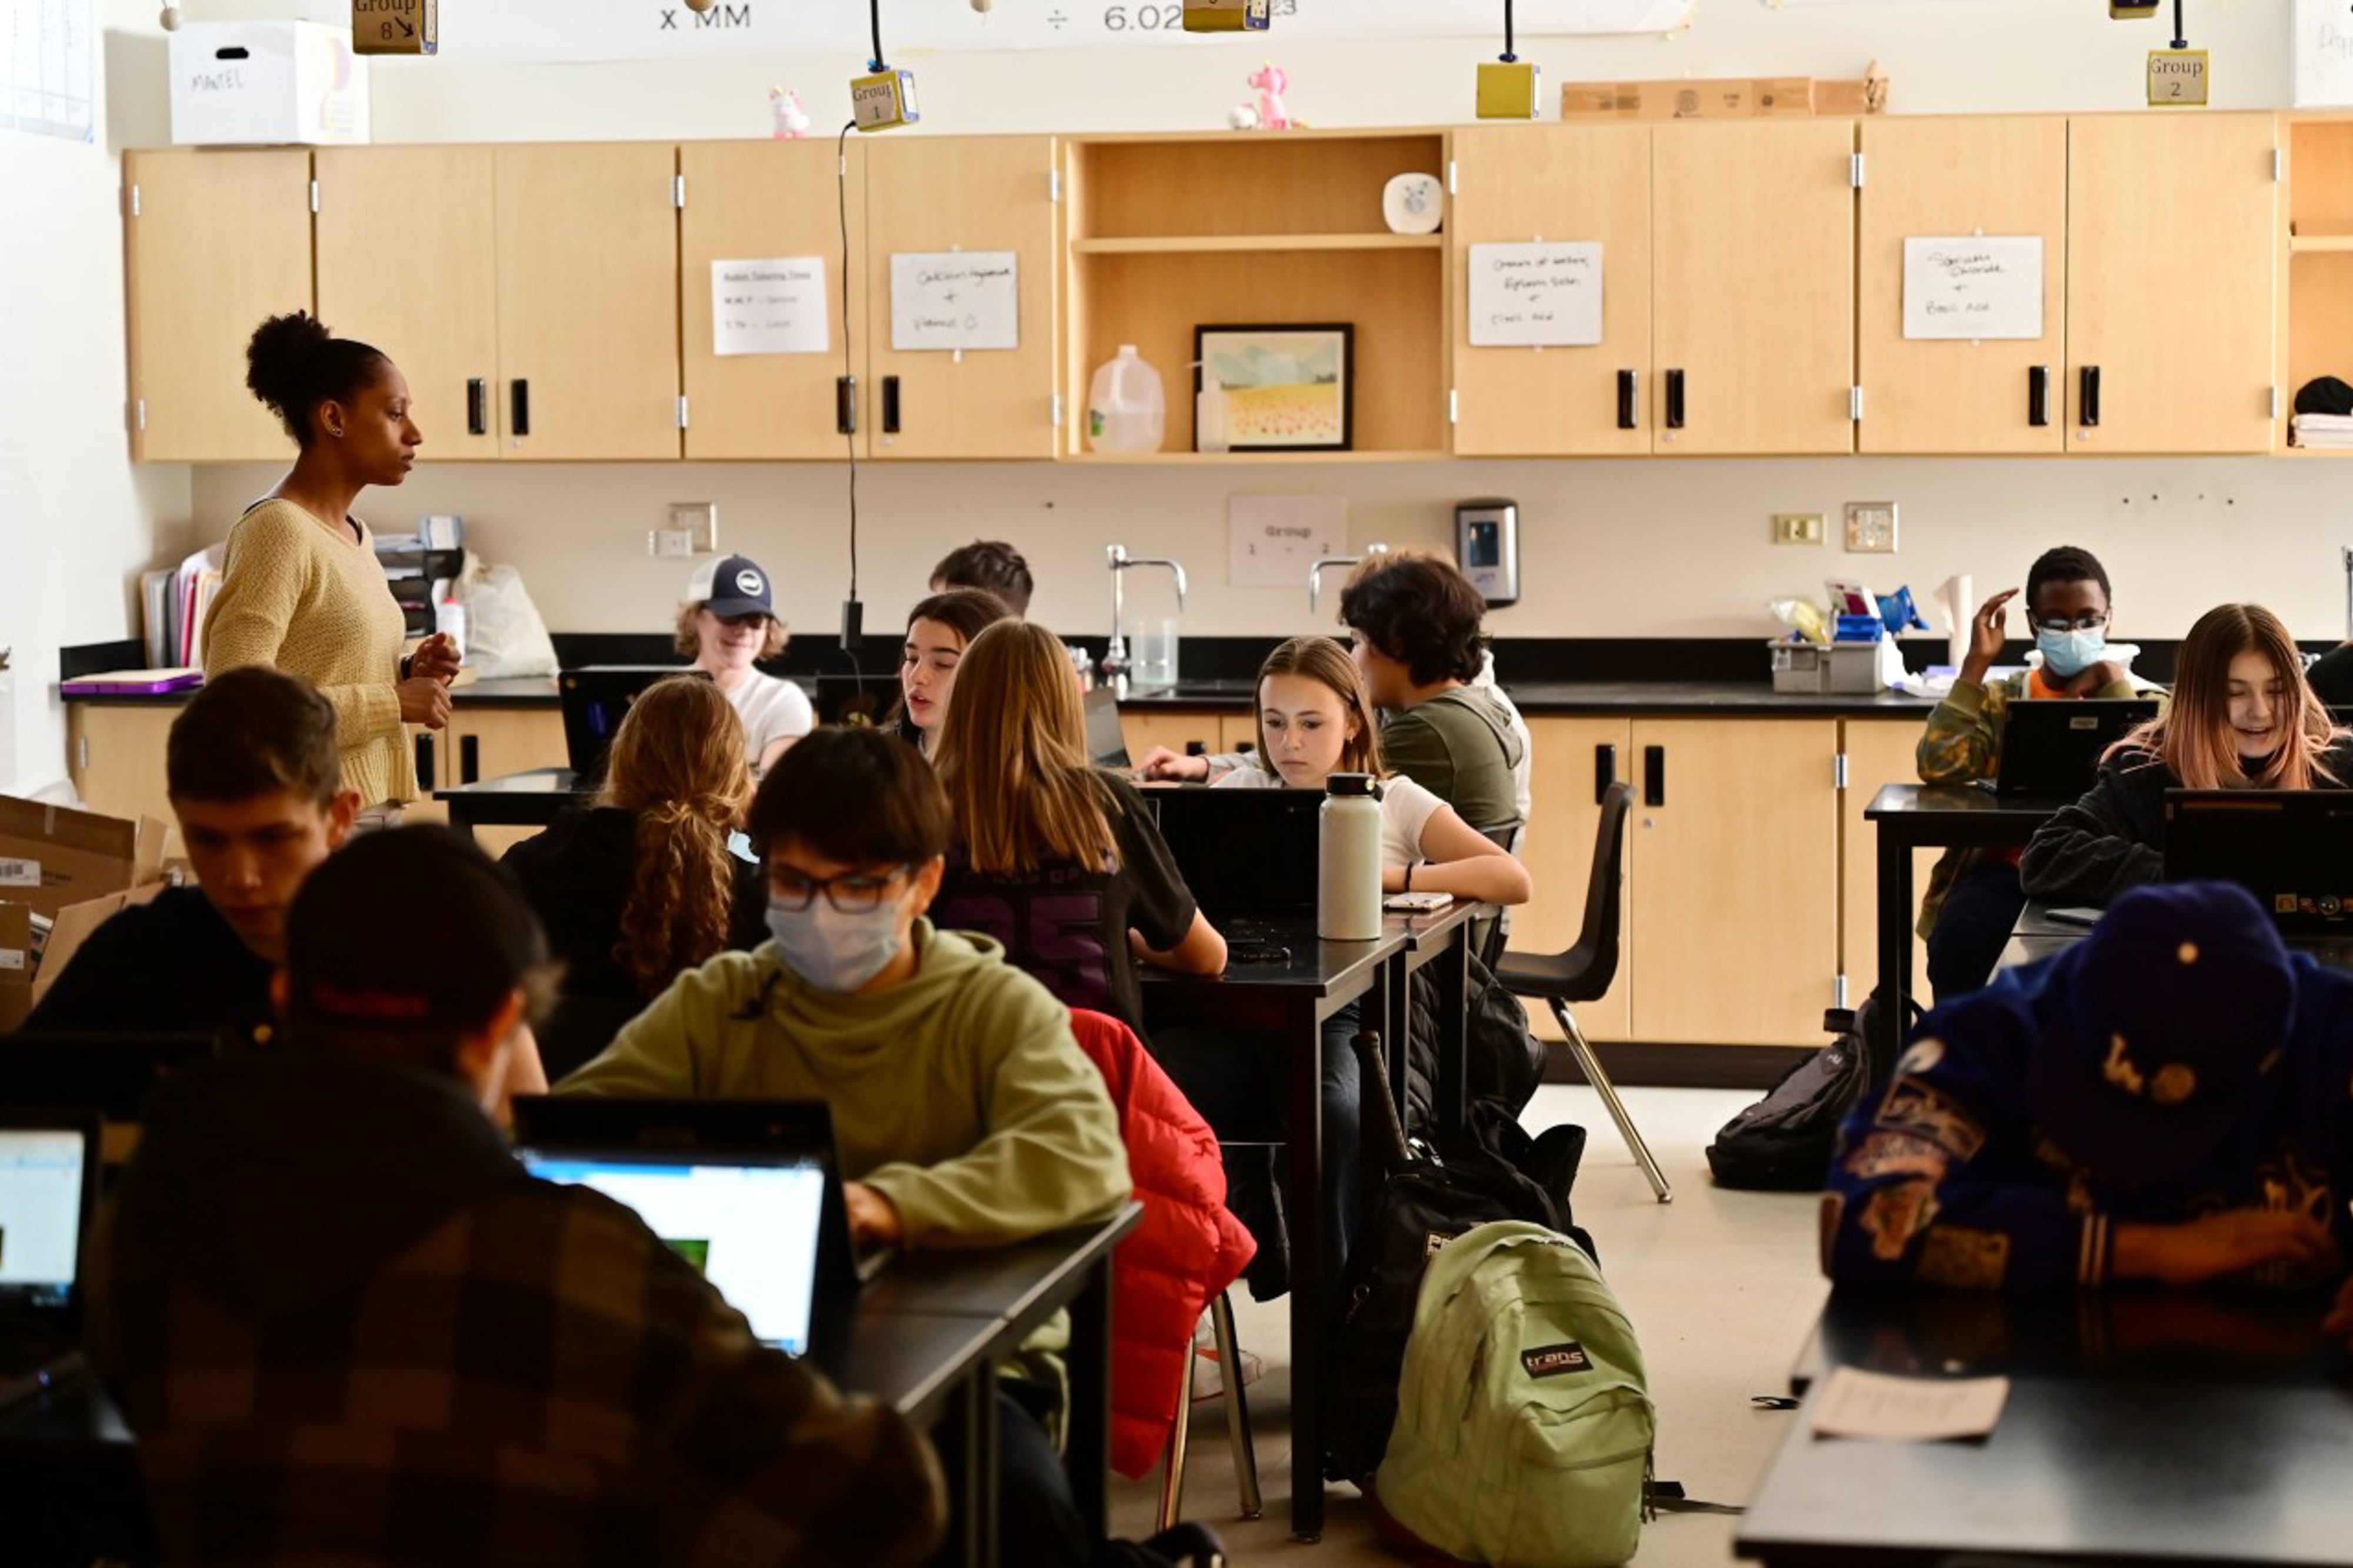 A high school teacher works with her students who are seated at tables in a science lab.